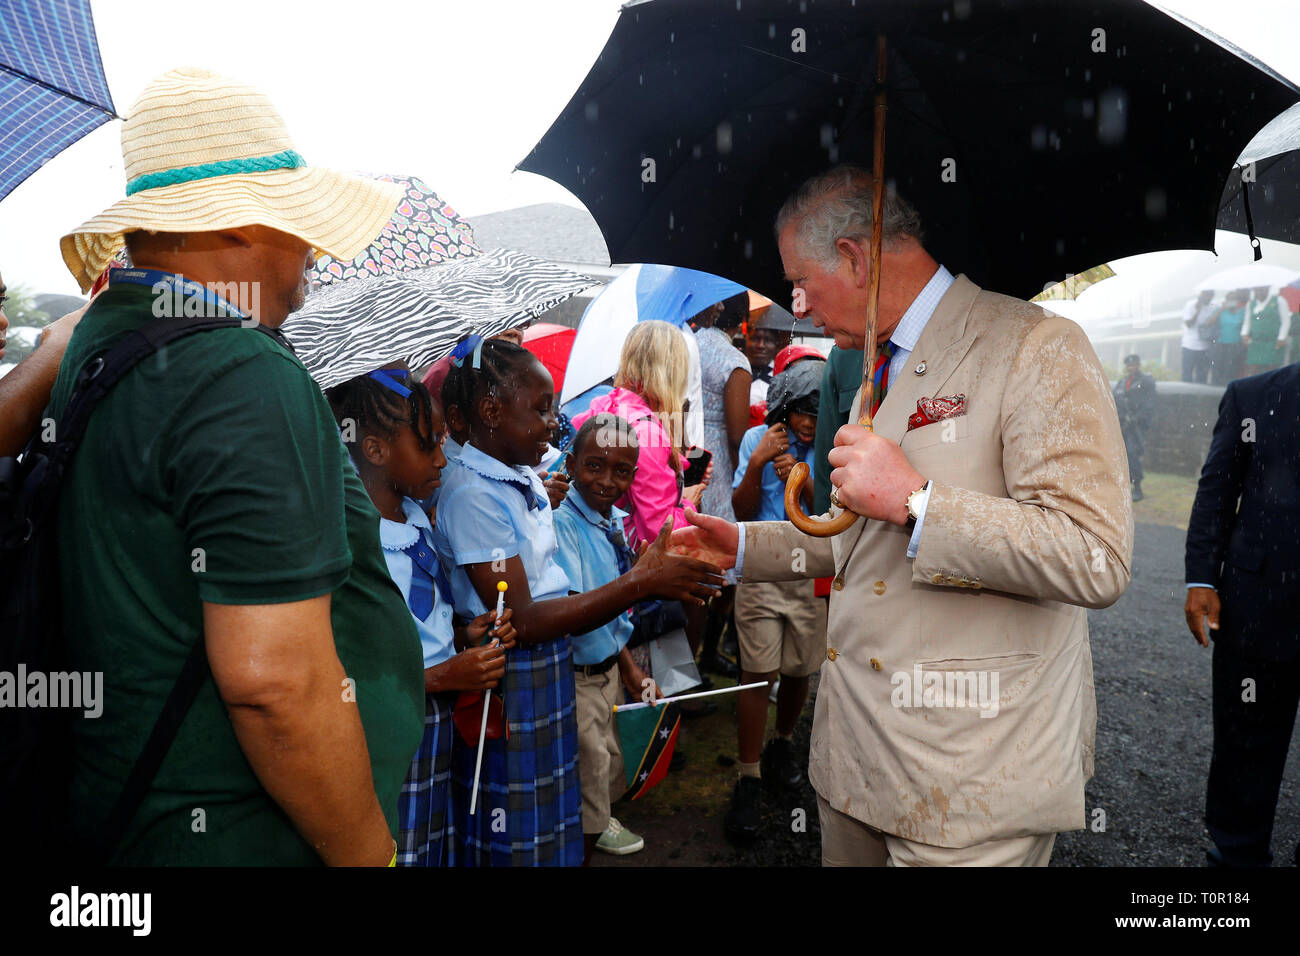 The Prince of Wales during a visit to Brimstone Hill Fortress National Park in St. Kitts and Nevis, a UNESCO World Heritage Site, during a one day visit to the Caribbean island. Stock Photo